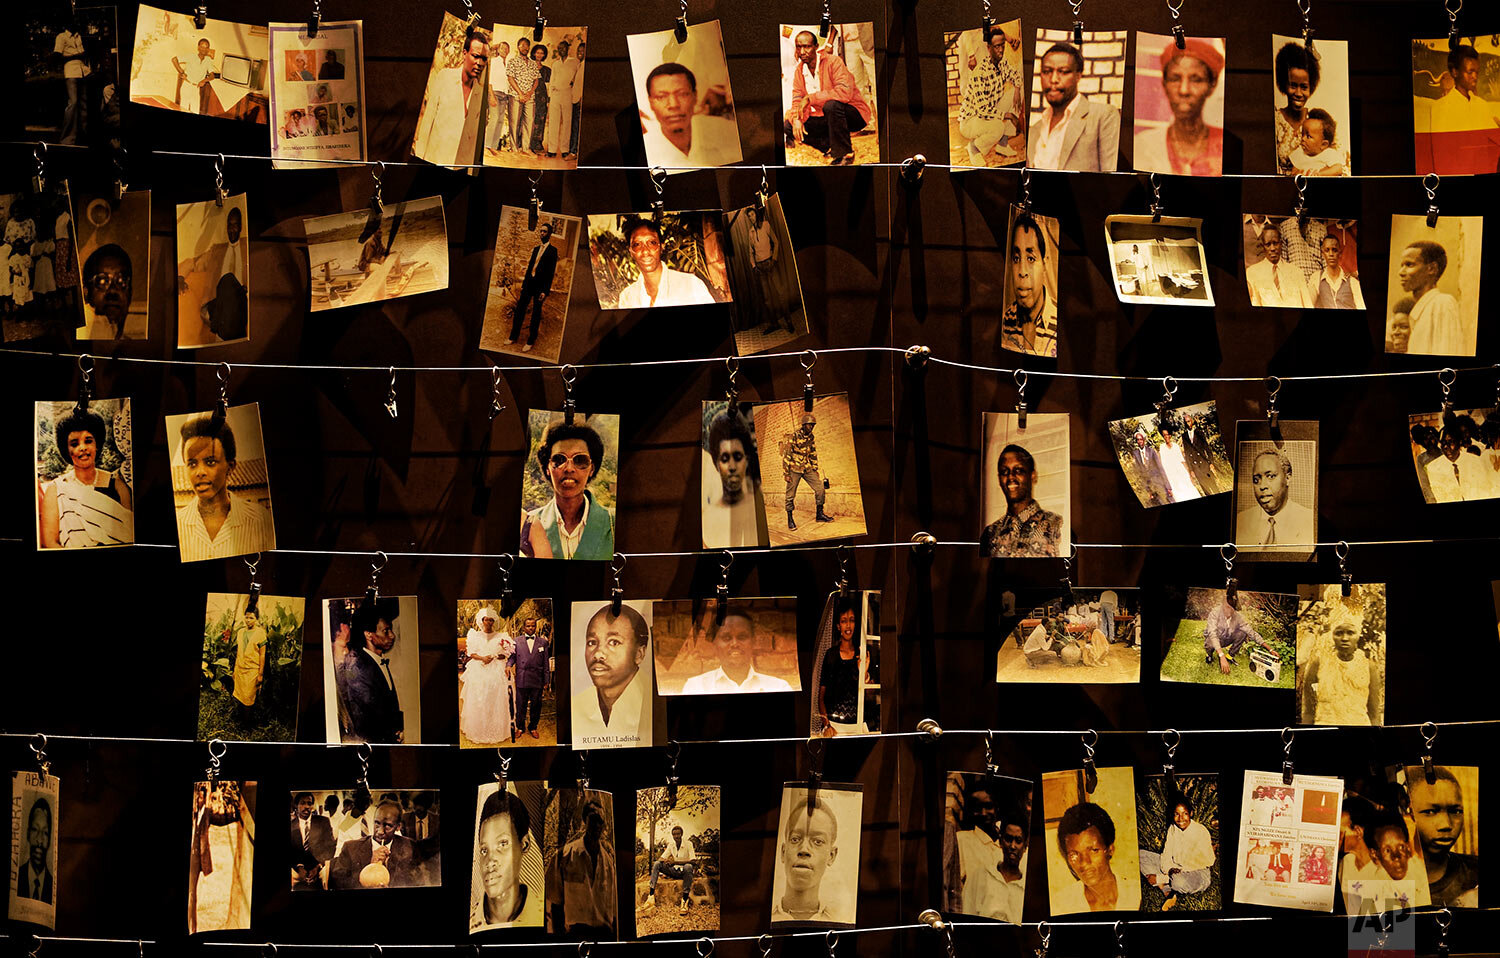  Family photos of some of those who died hang on display in an exhibition at the Kigali Genocide Memorial centre in the Rwandan capital, Kigali, on April 5, 2019. Rwanda commemorated the 25th anniversary of the country's descent into an orgy of viole